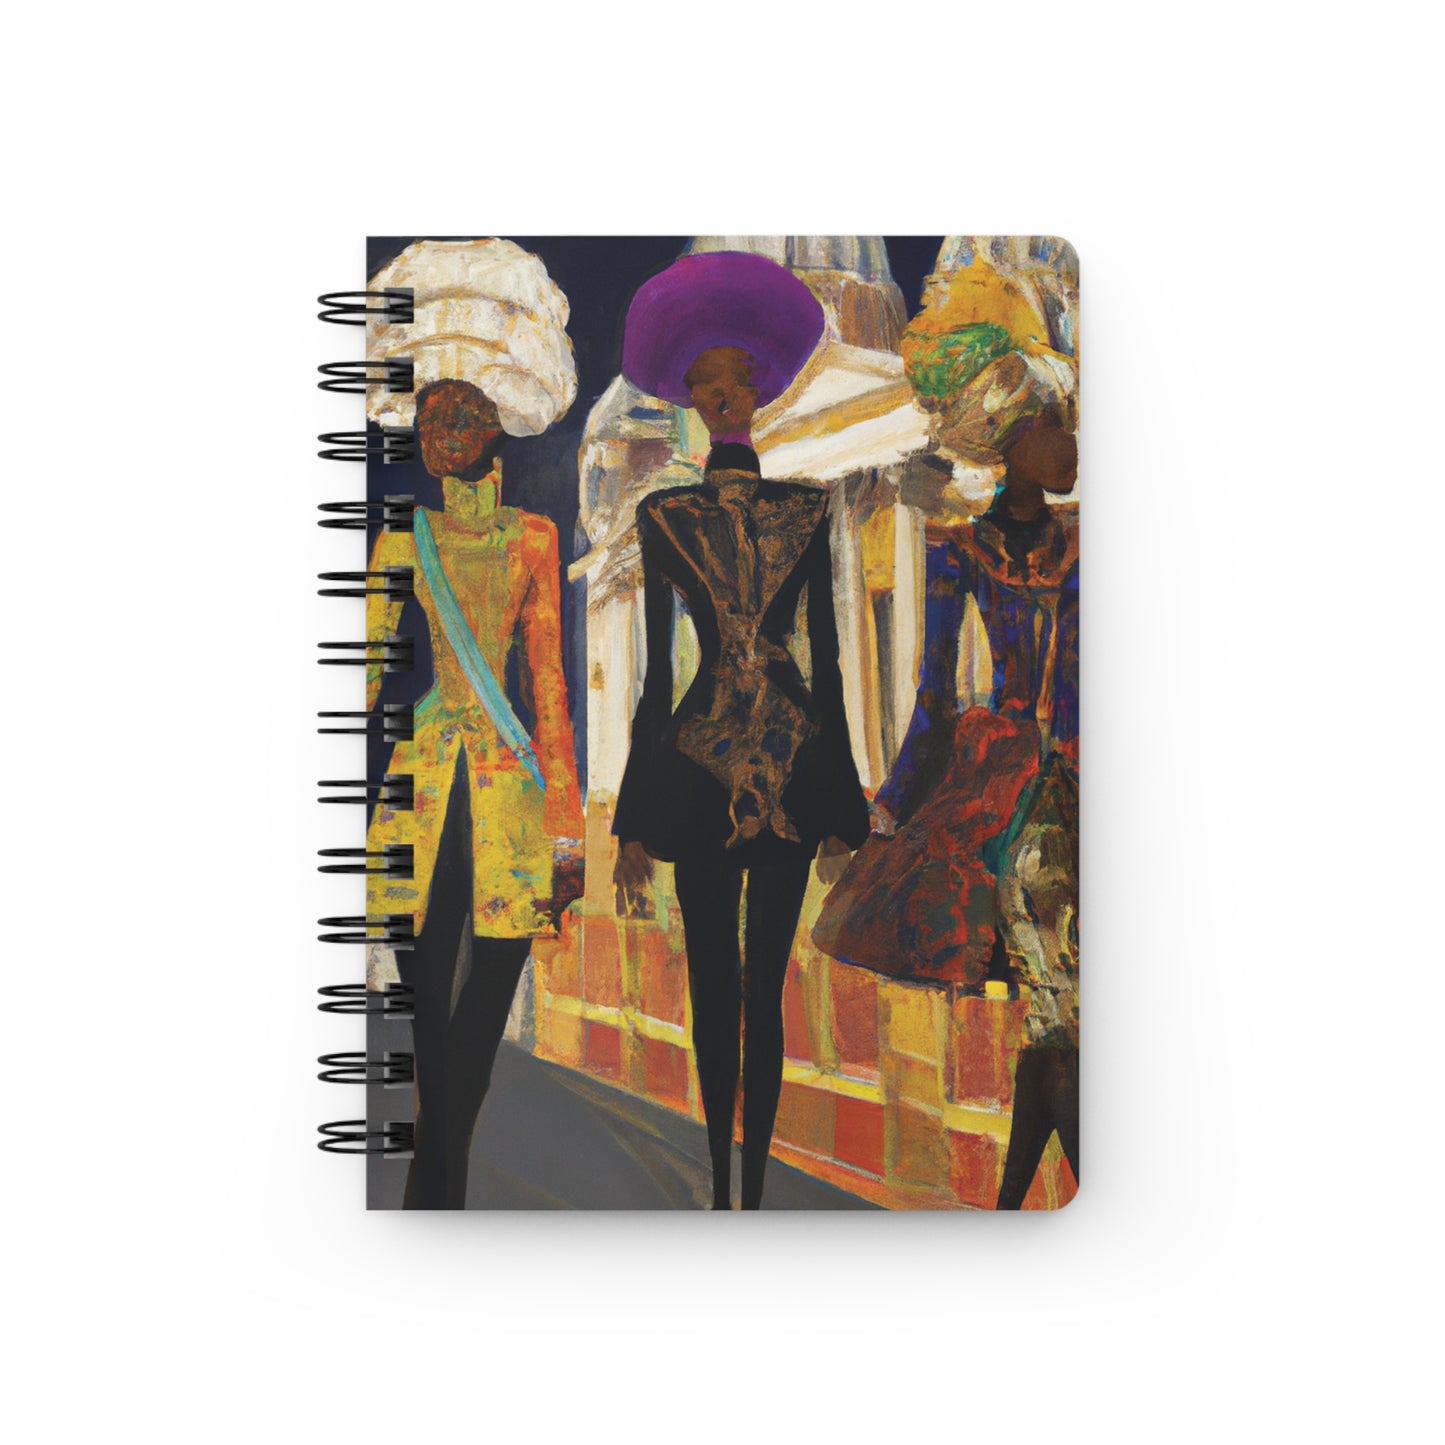 I'm That Girl Spiral Notebooks and Journals with 2023-2024 Year-at-a-Glance Calendar